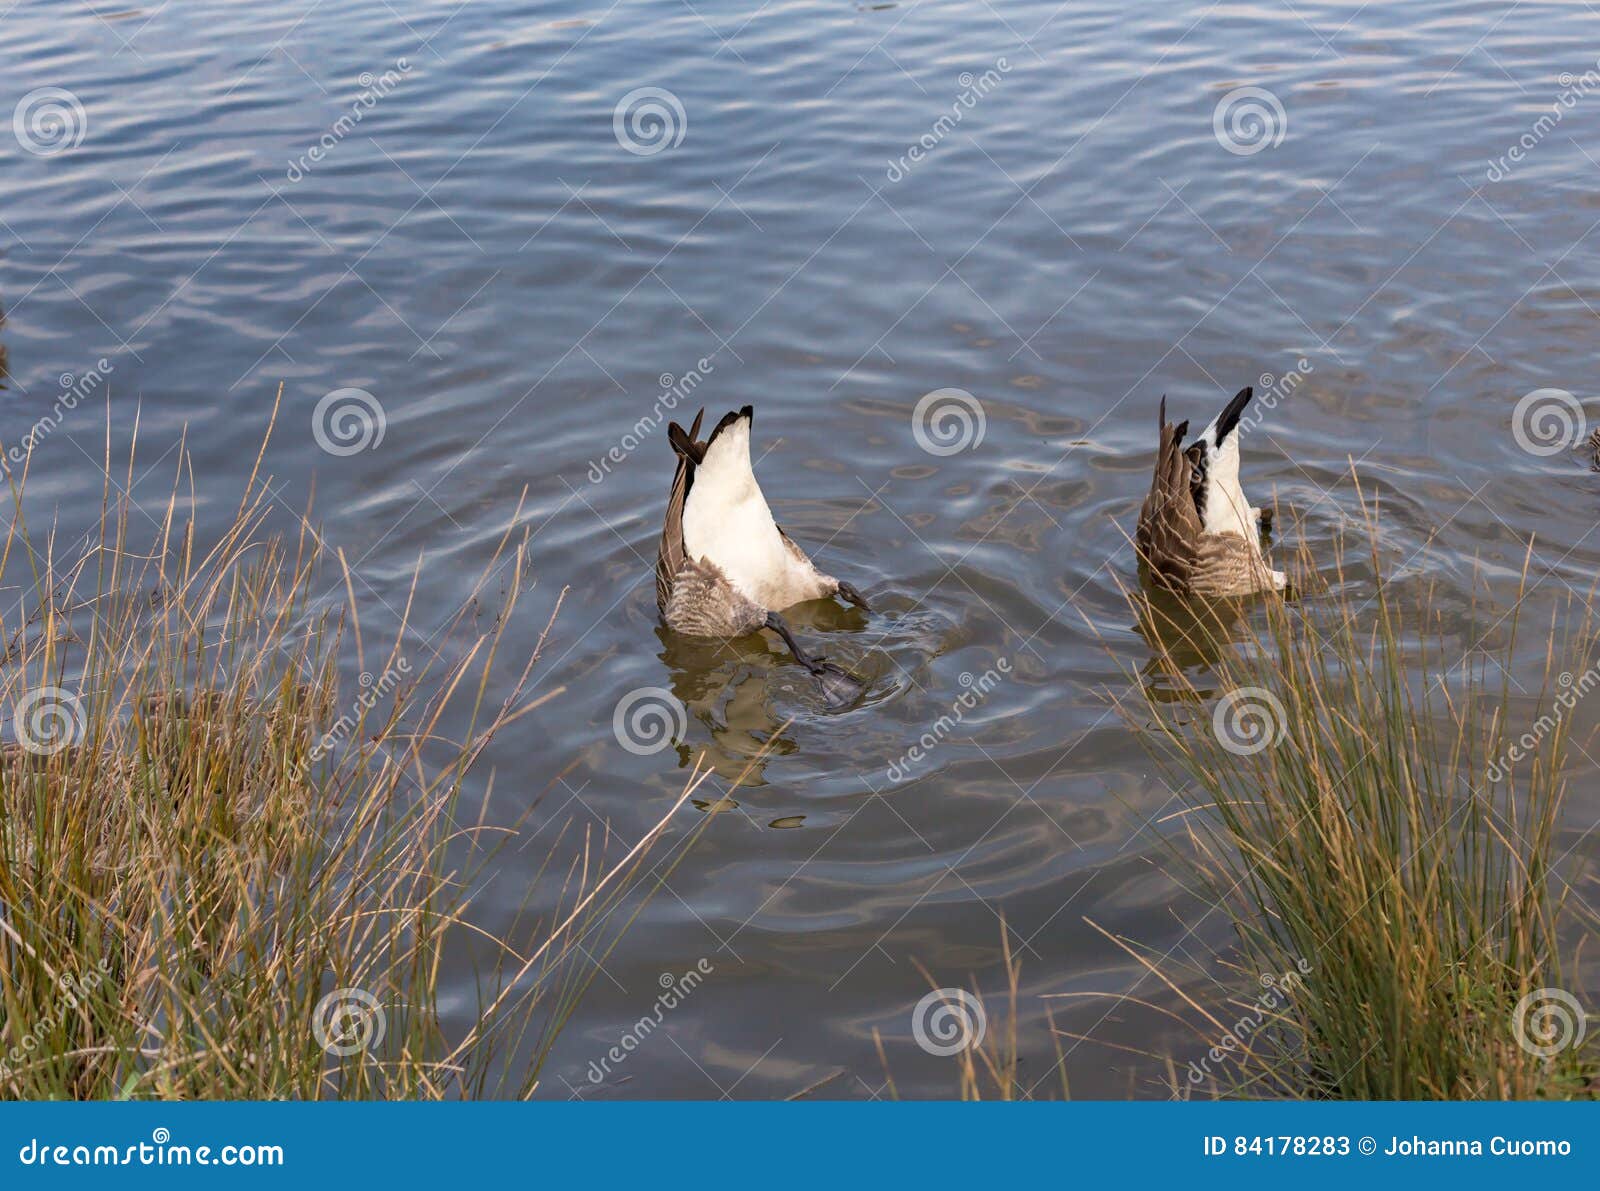 two canadian geese, bottoms up in the lake.